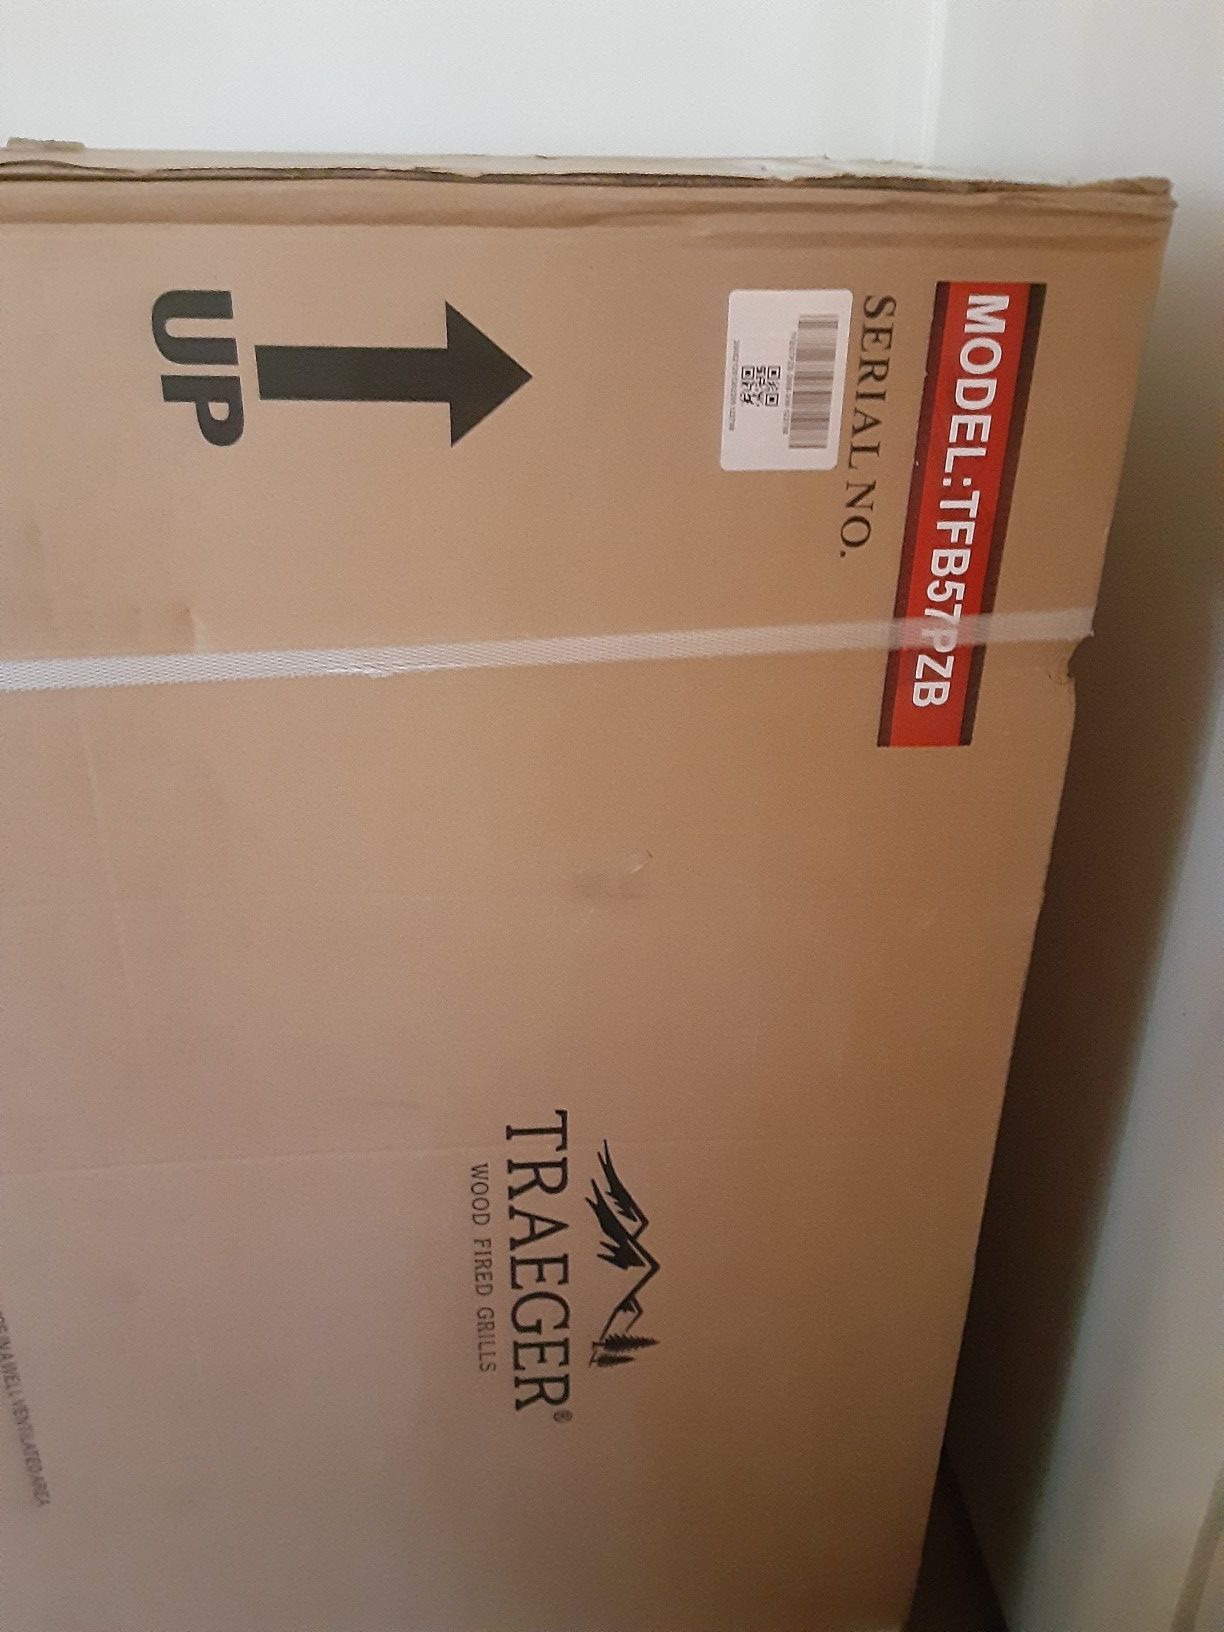 NEW Traeger wood fire grill in box